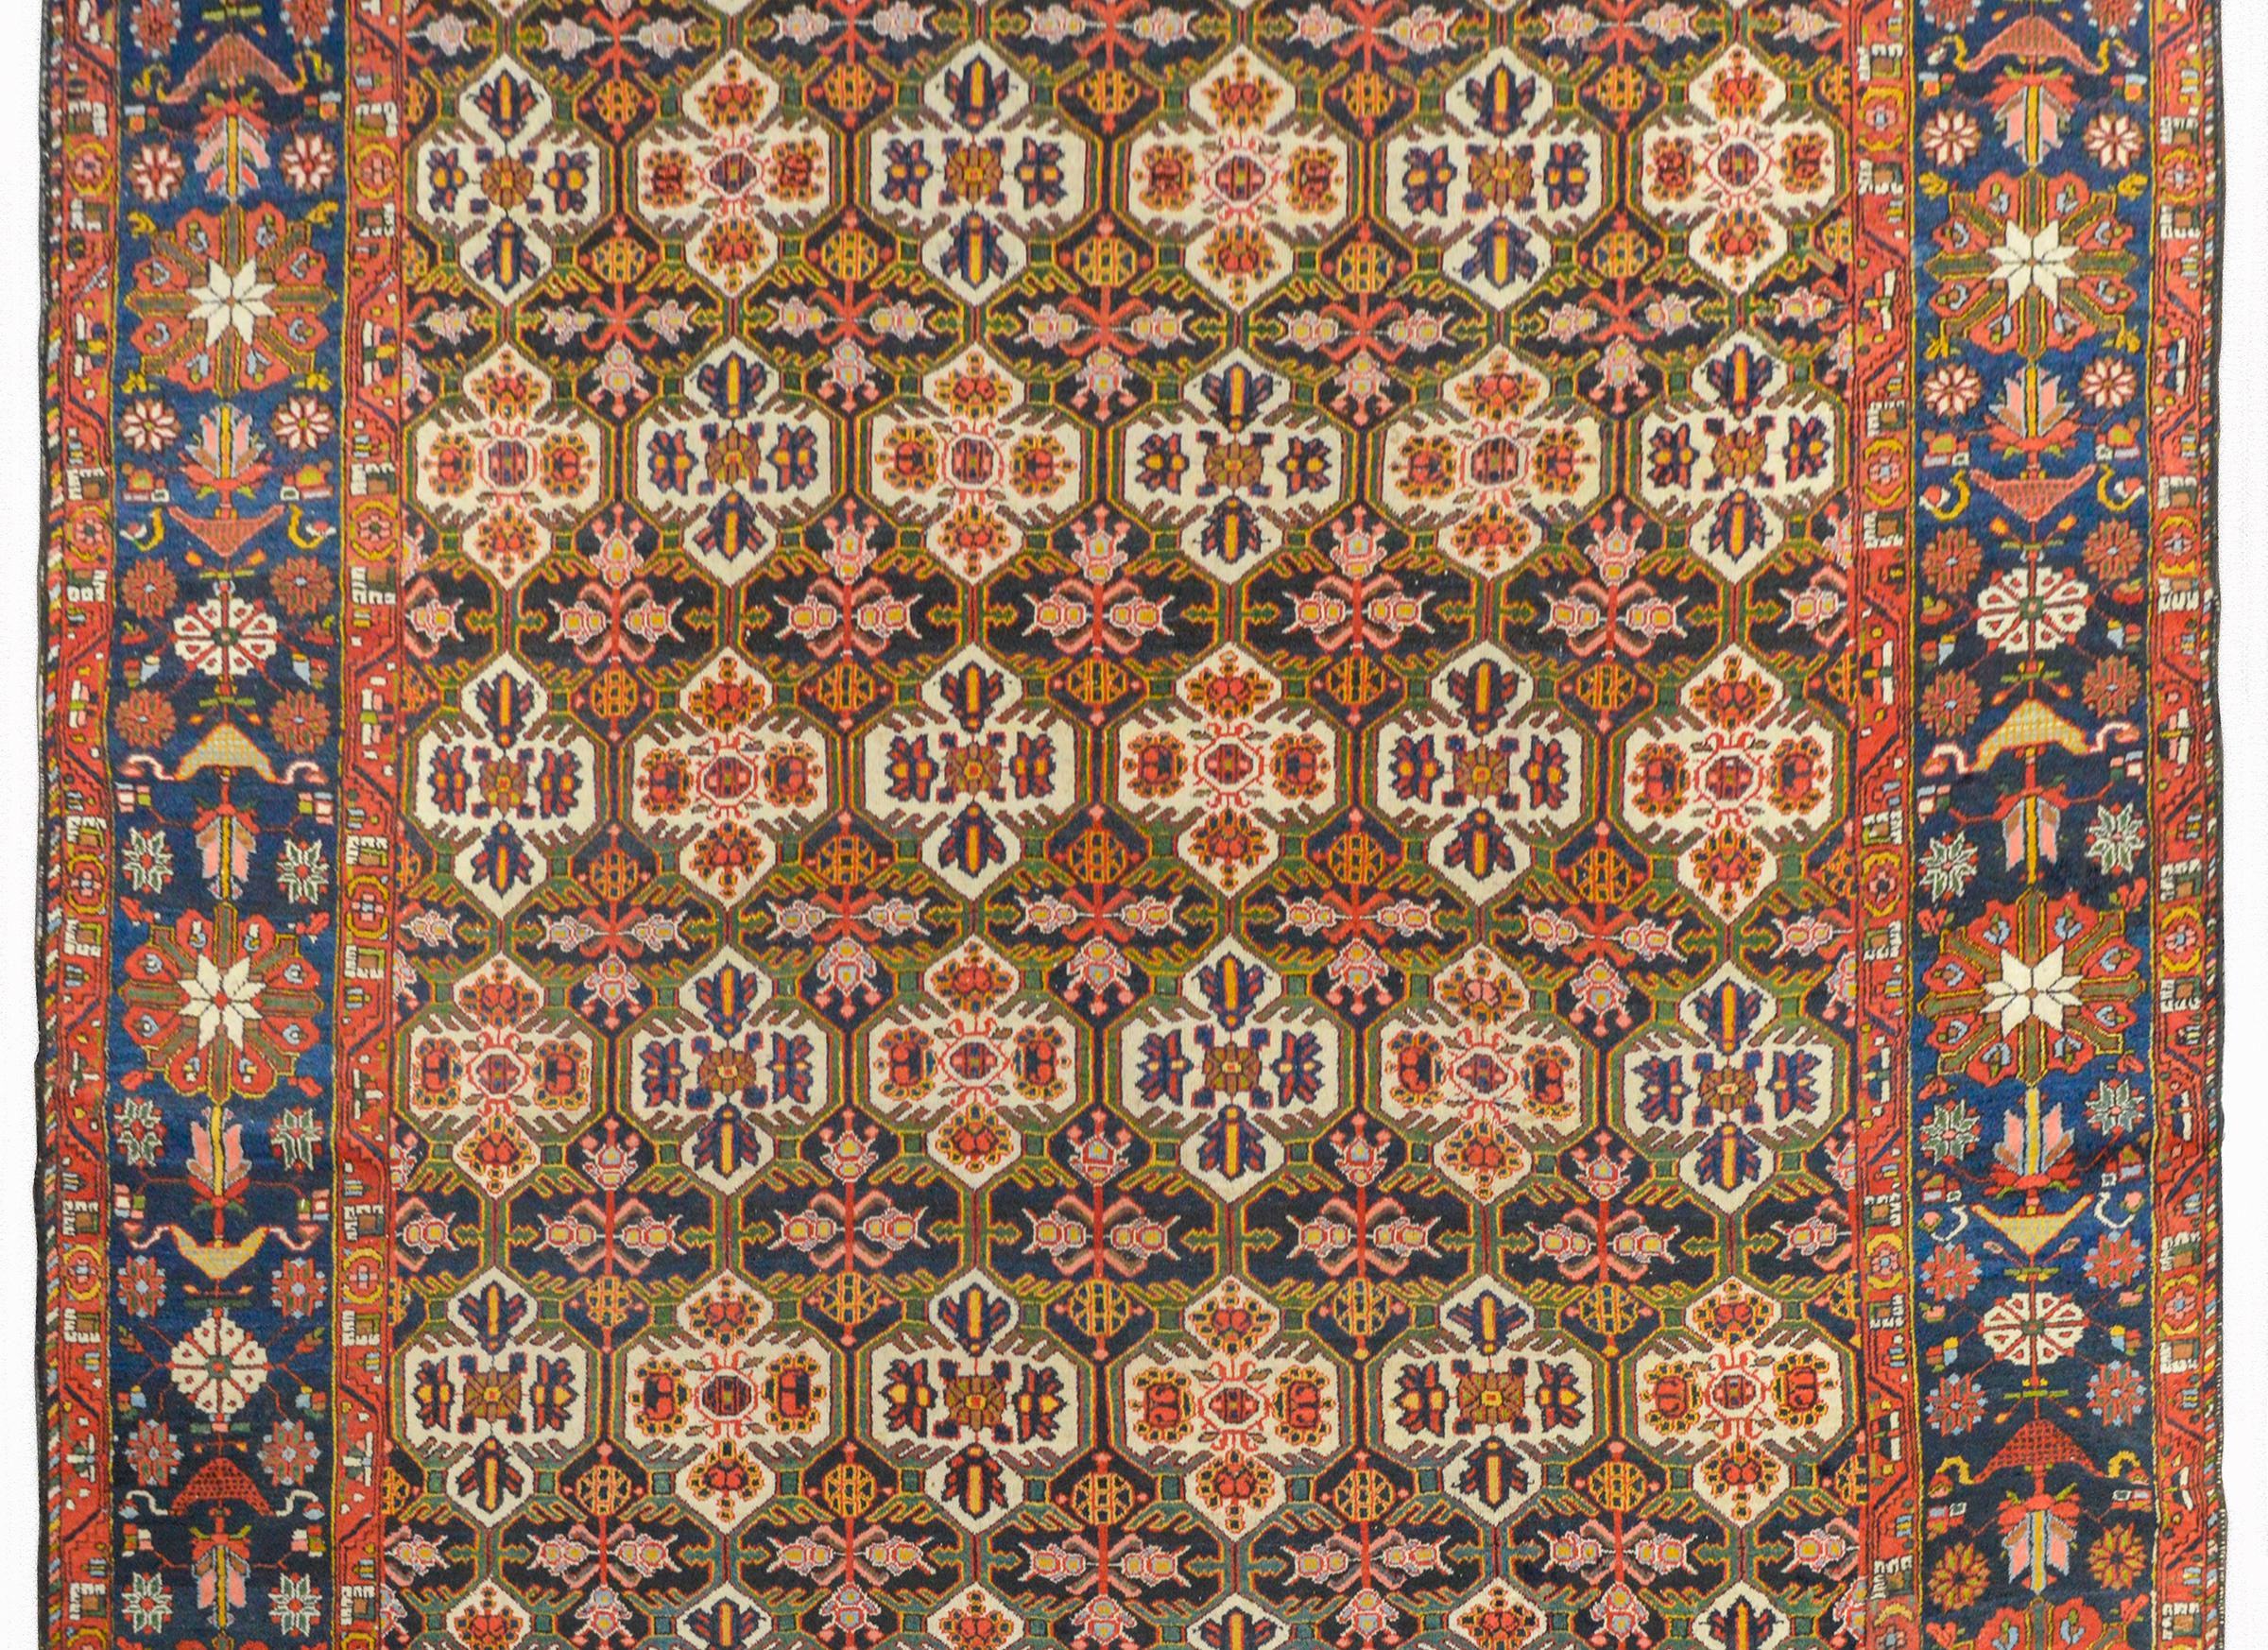 A wonderful 20th century Persian Bakhtiari rug with an all-over trellis and floral pattern woven in rich colors like crimson, gold, green, and indigo, and surrounded by a wide border containing myriad large-scale flowers and leaves, woven in the